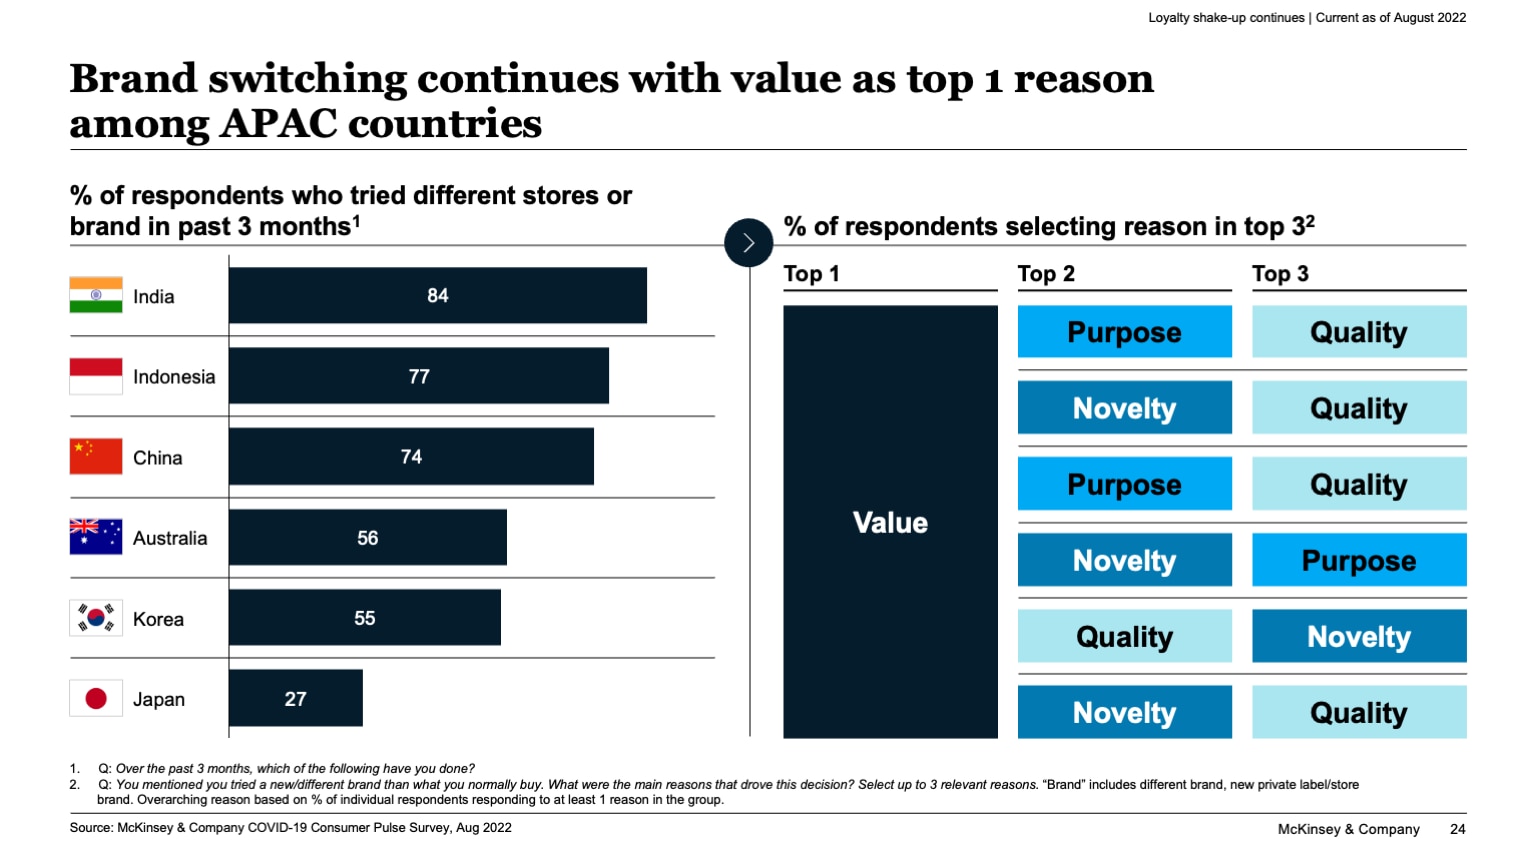 Brand switching continues with value as top 1 reason among APAC countries